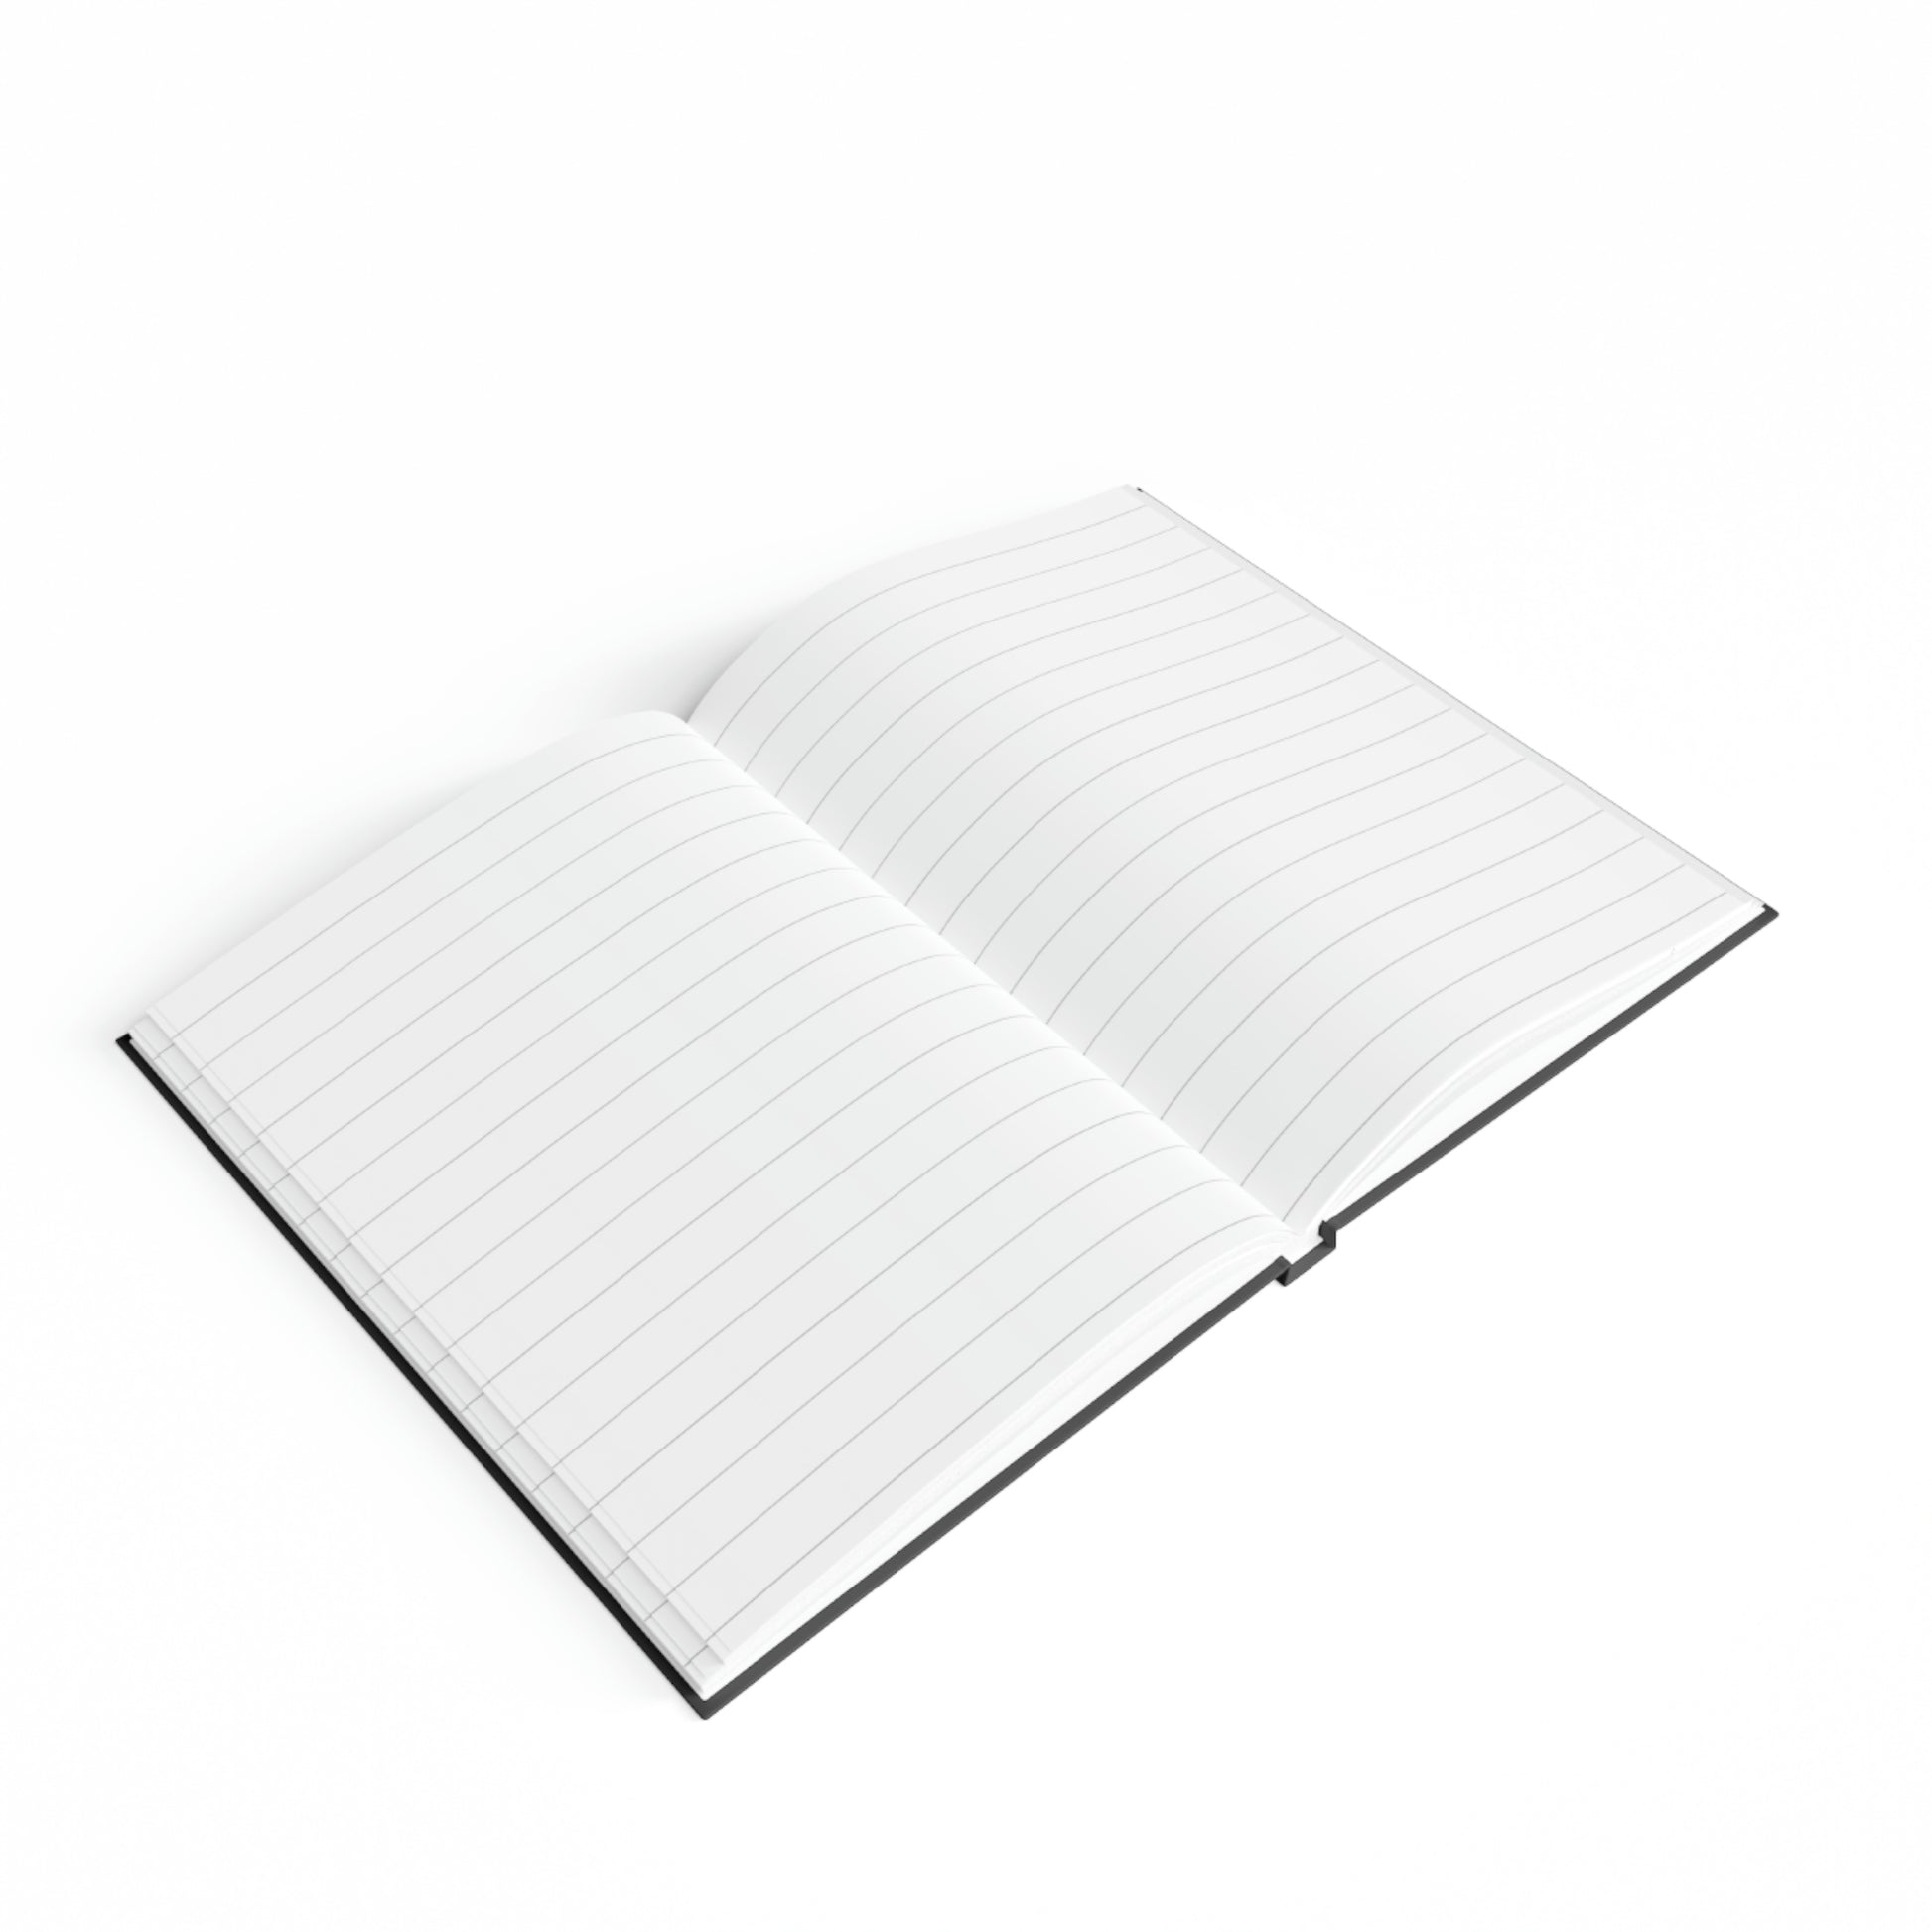 hyk store stationary hardback journal lined blank or graph